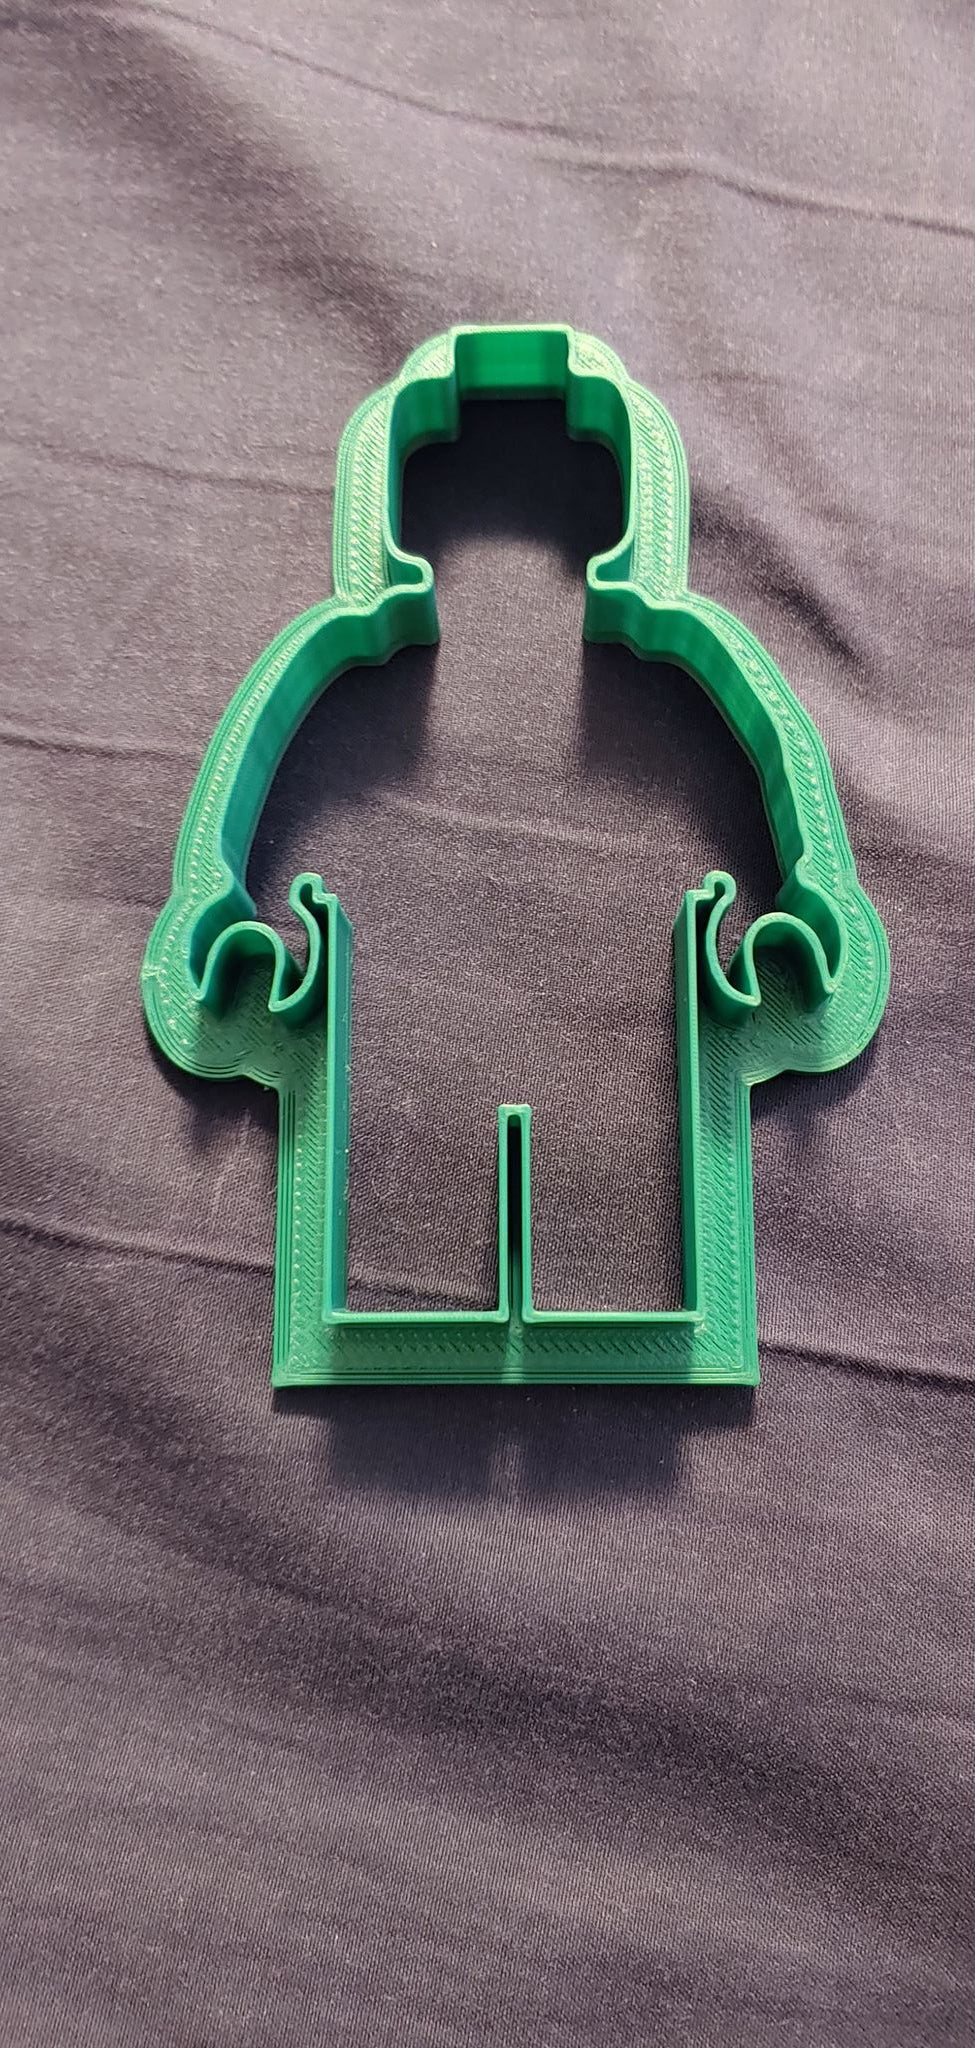 3D Printed Cookie Cutter Inspired by Lego Minifig